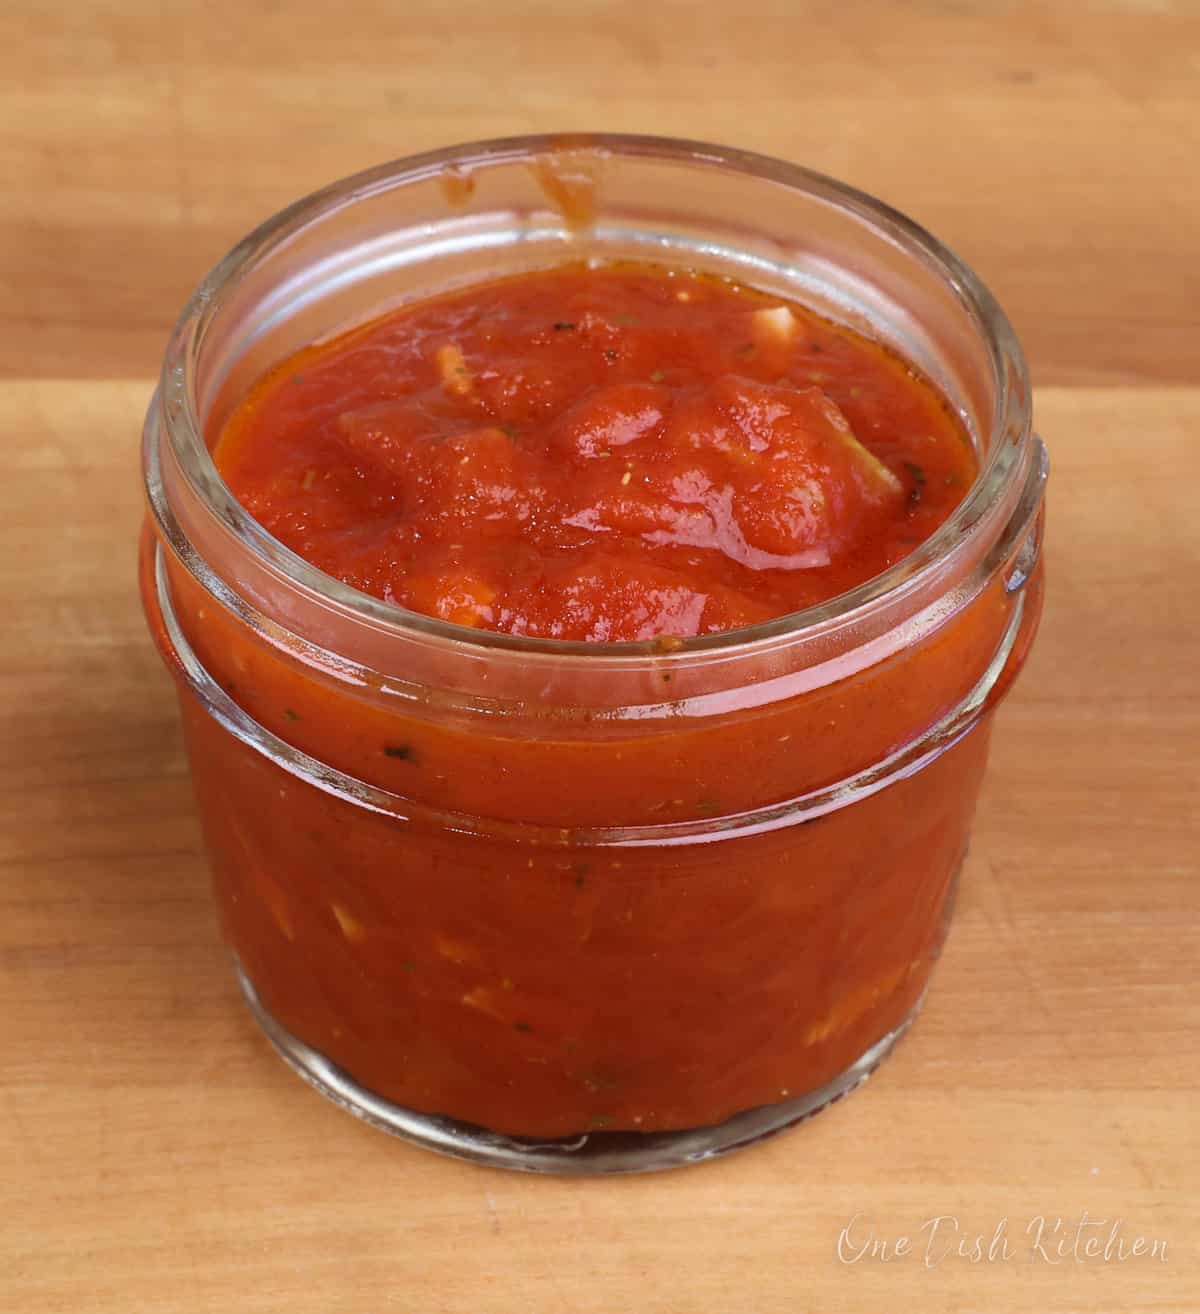 a small jar of homemade pizza sauce on a kitchen counter